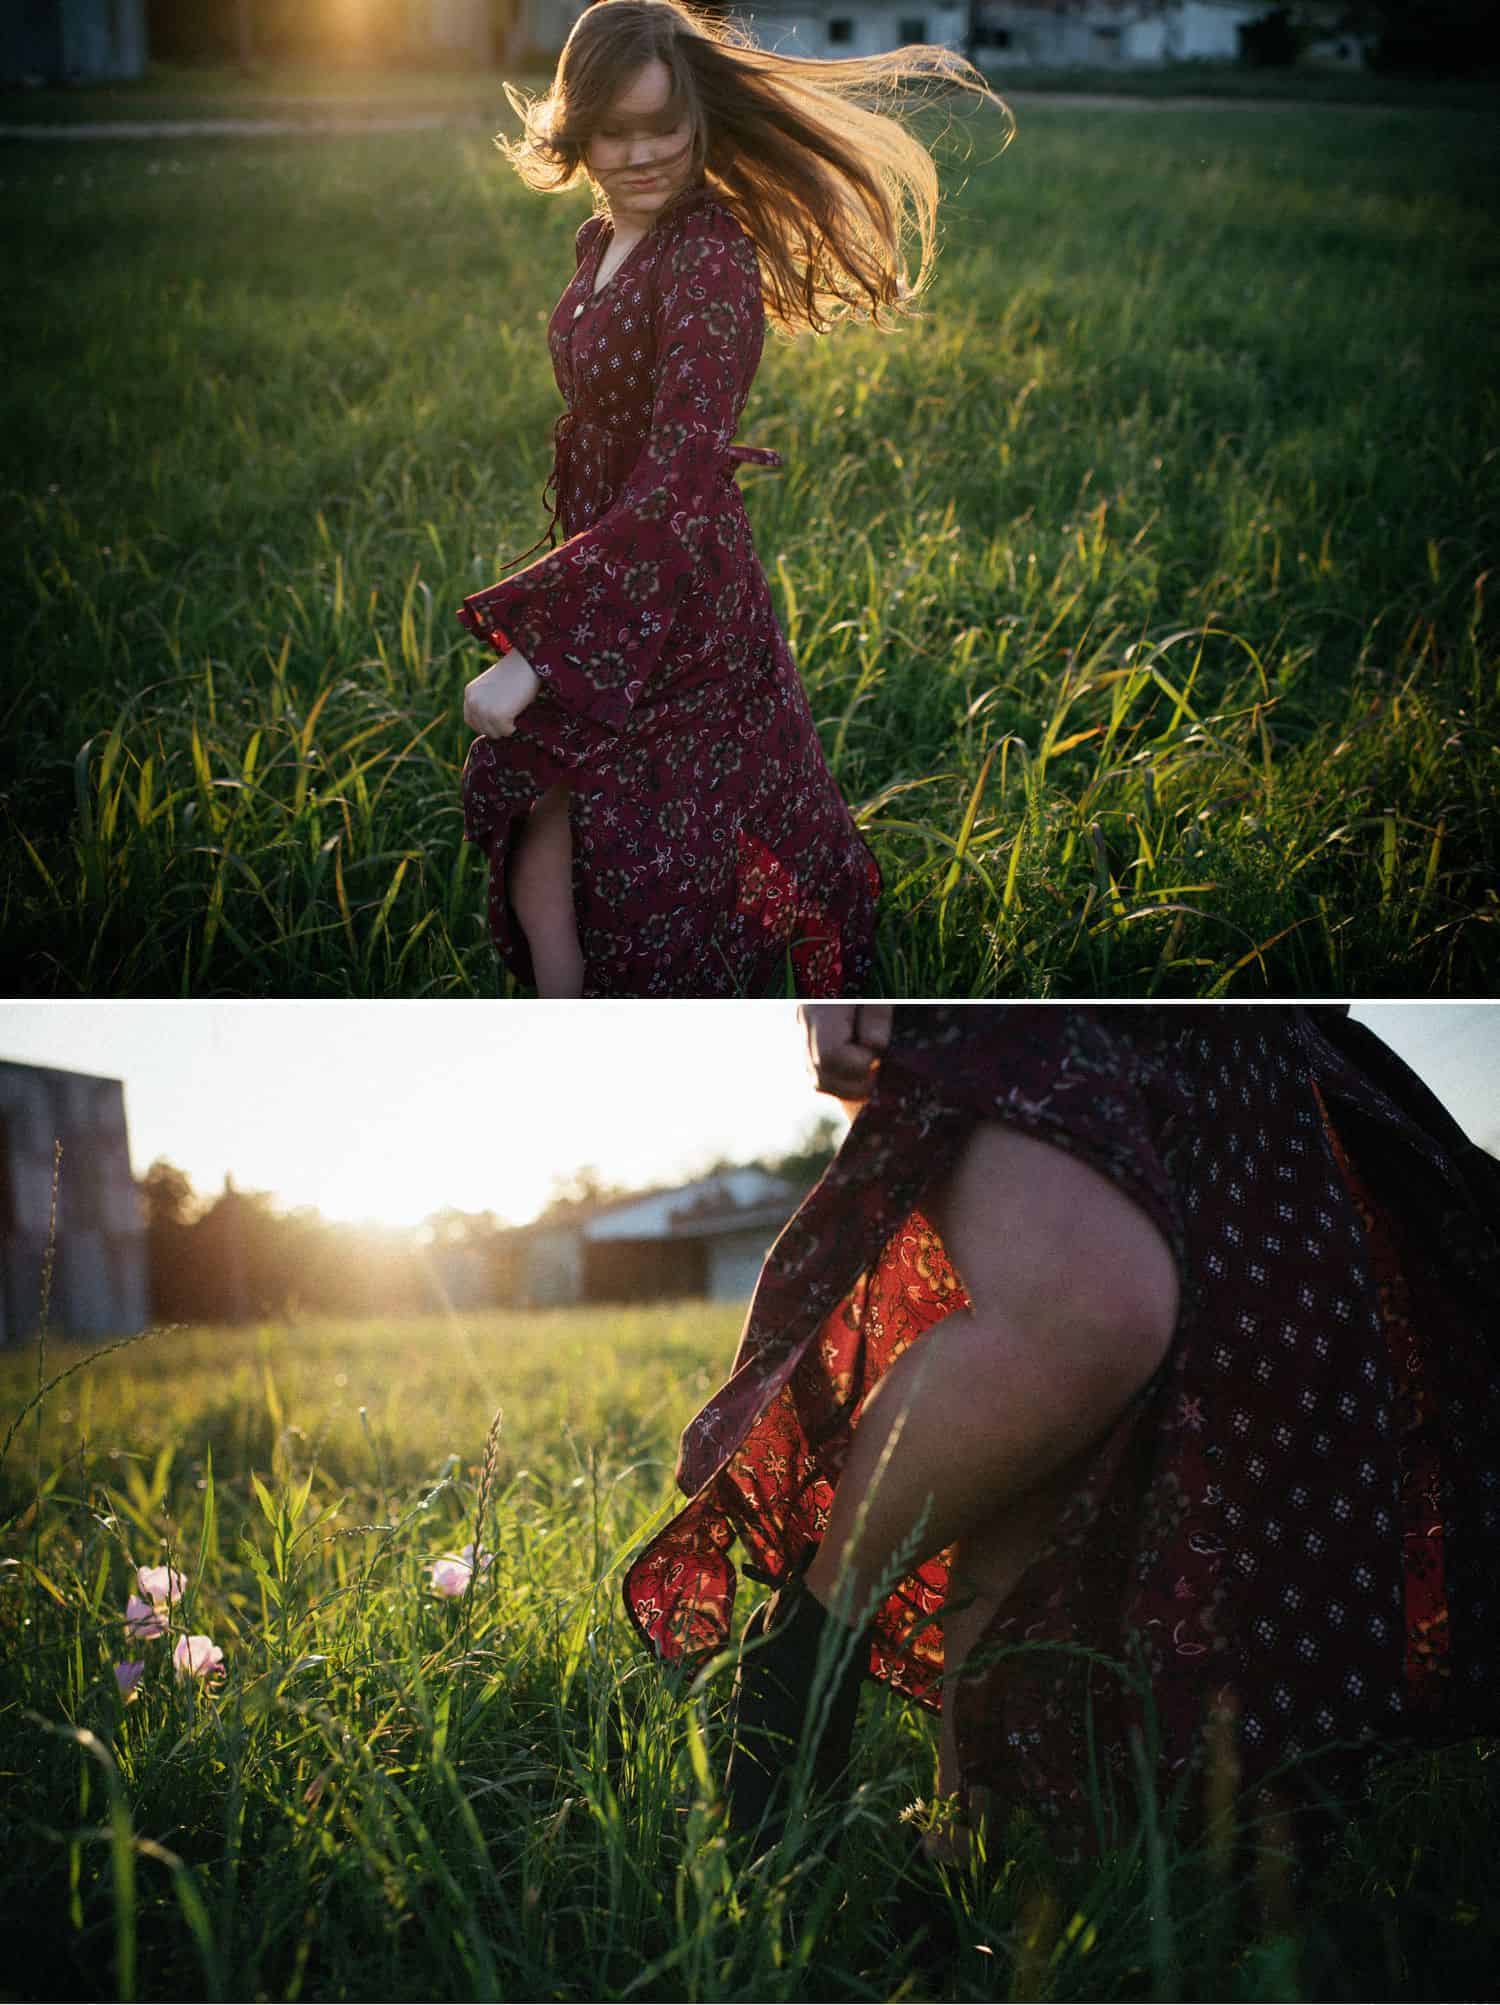 I Quit Taking "Safe" Photos. It Was the Best Decision of My Life. - Senior girl frolicking in a sunlit field.